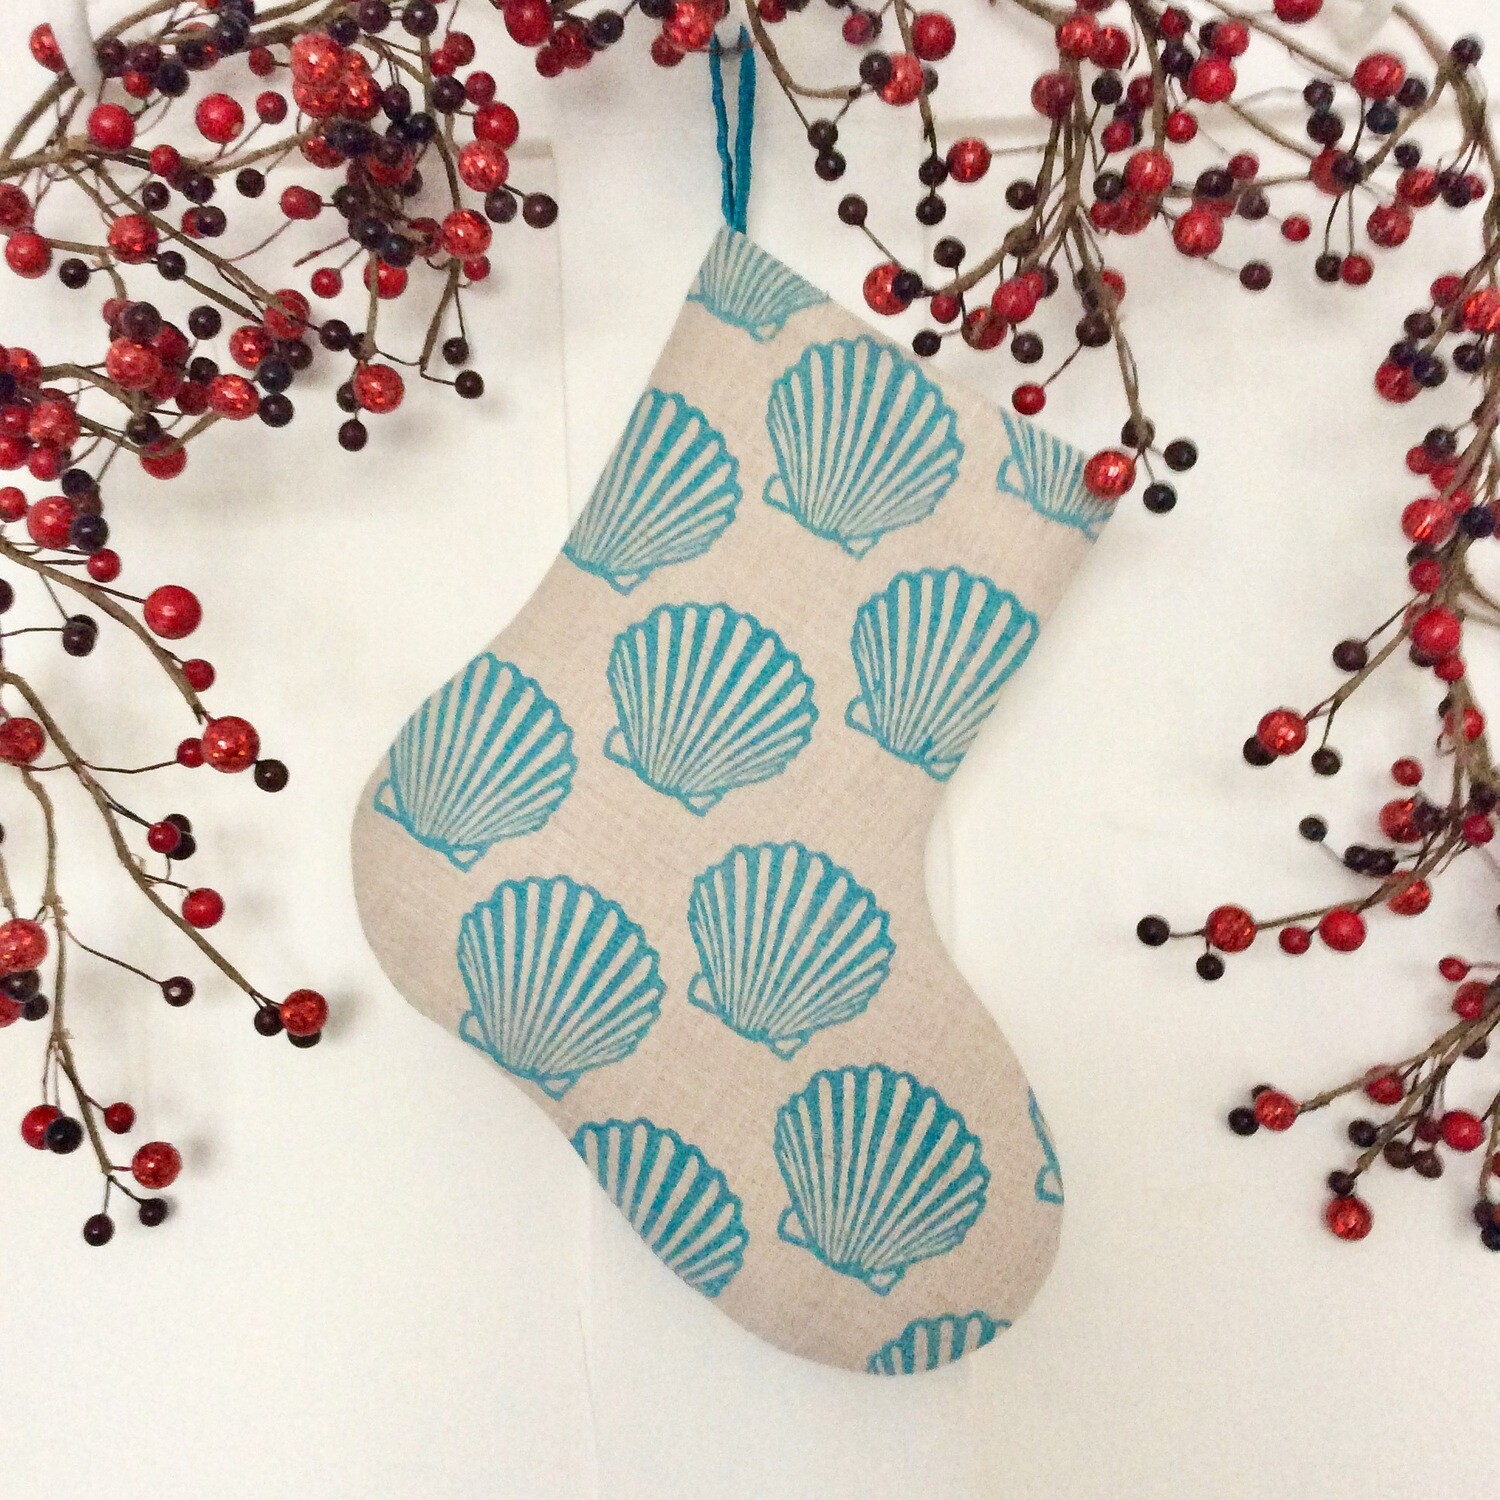 Christmas Bootees - Scallop Shell
Teal on natural linen